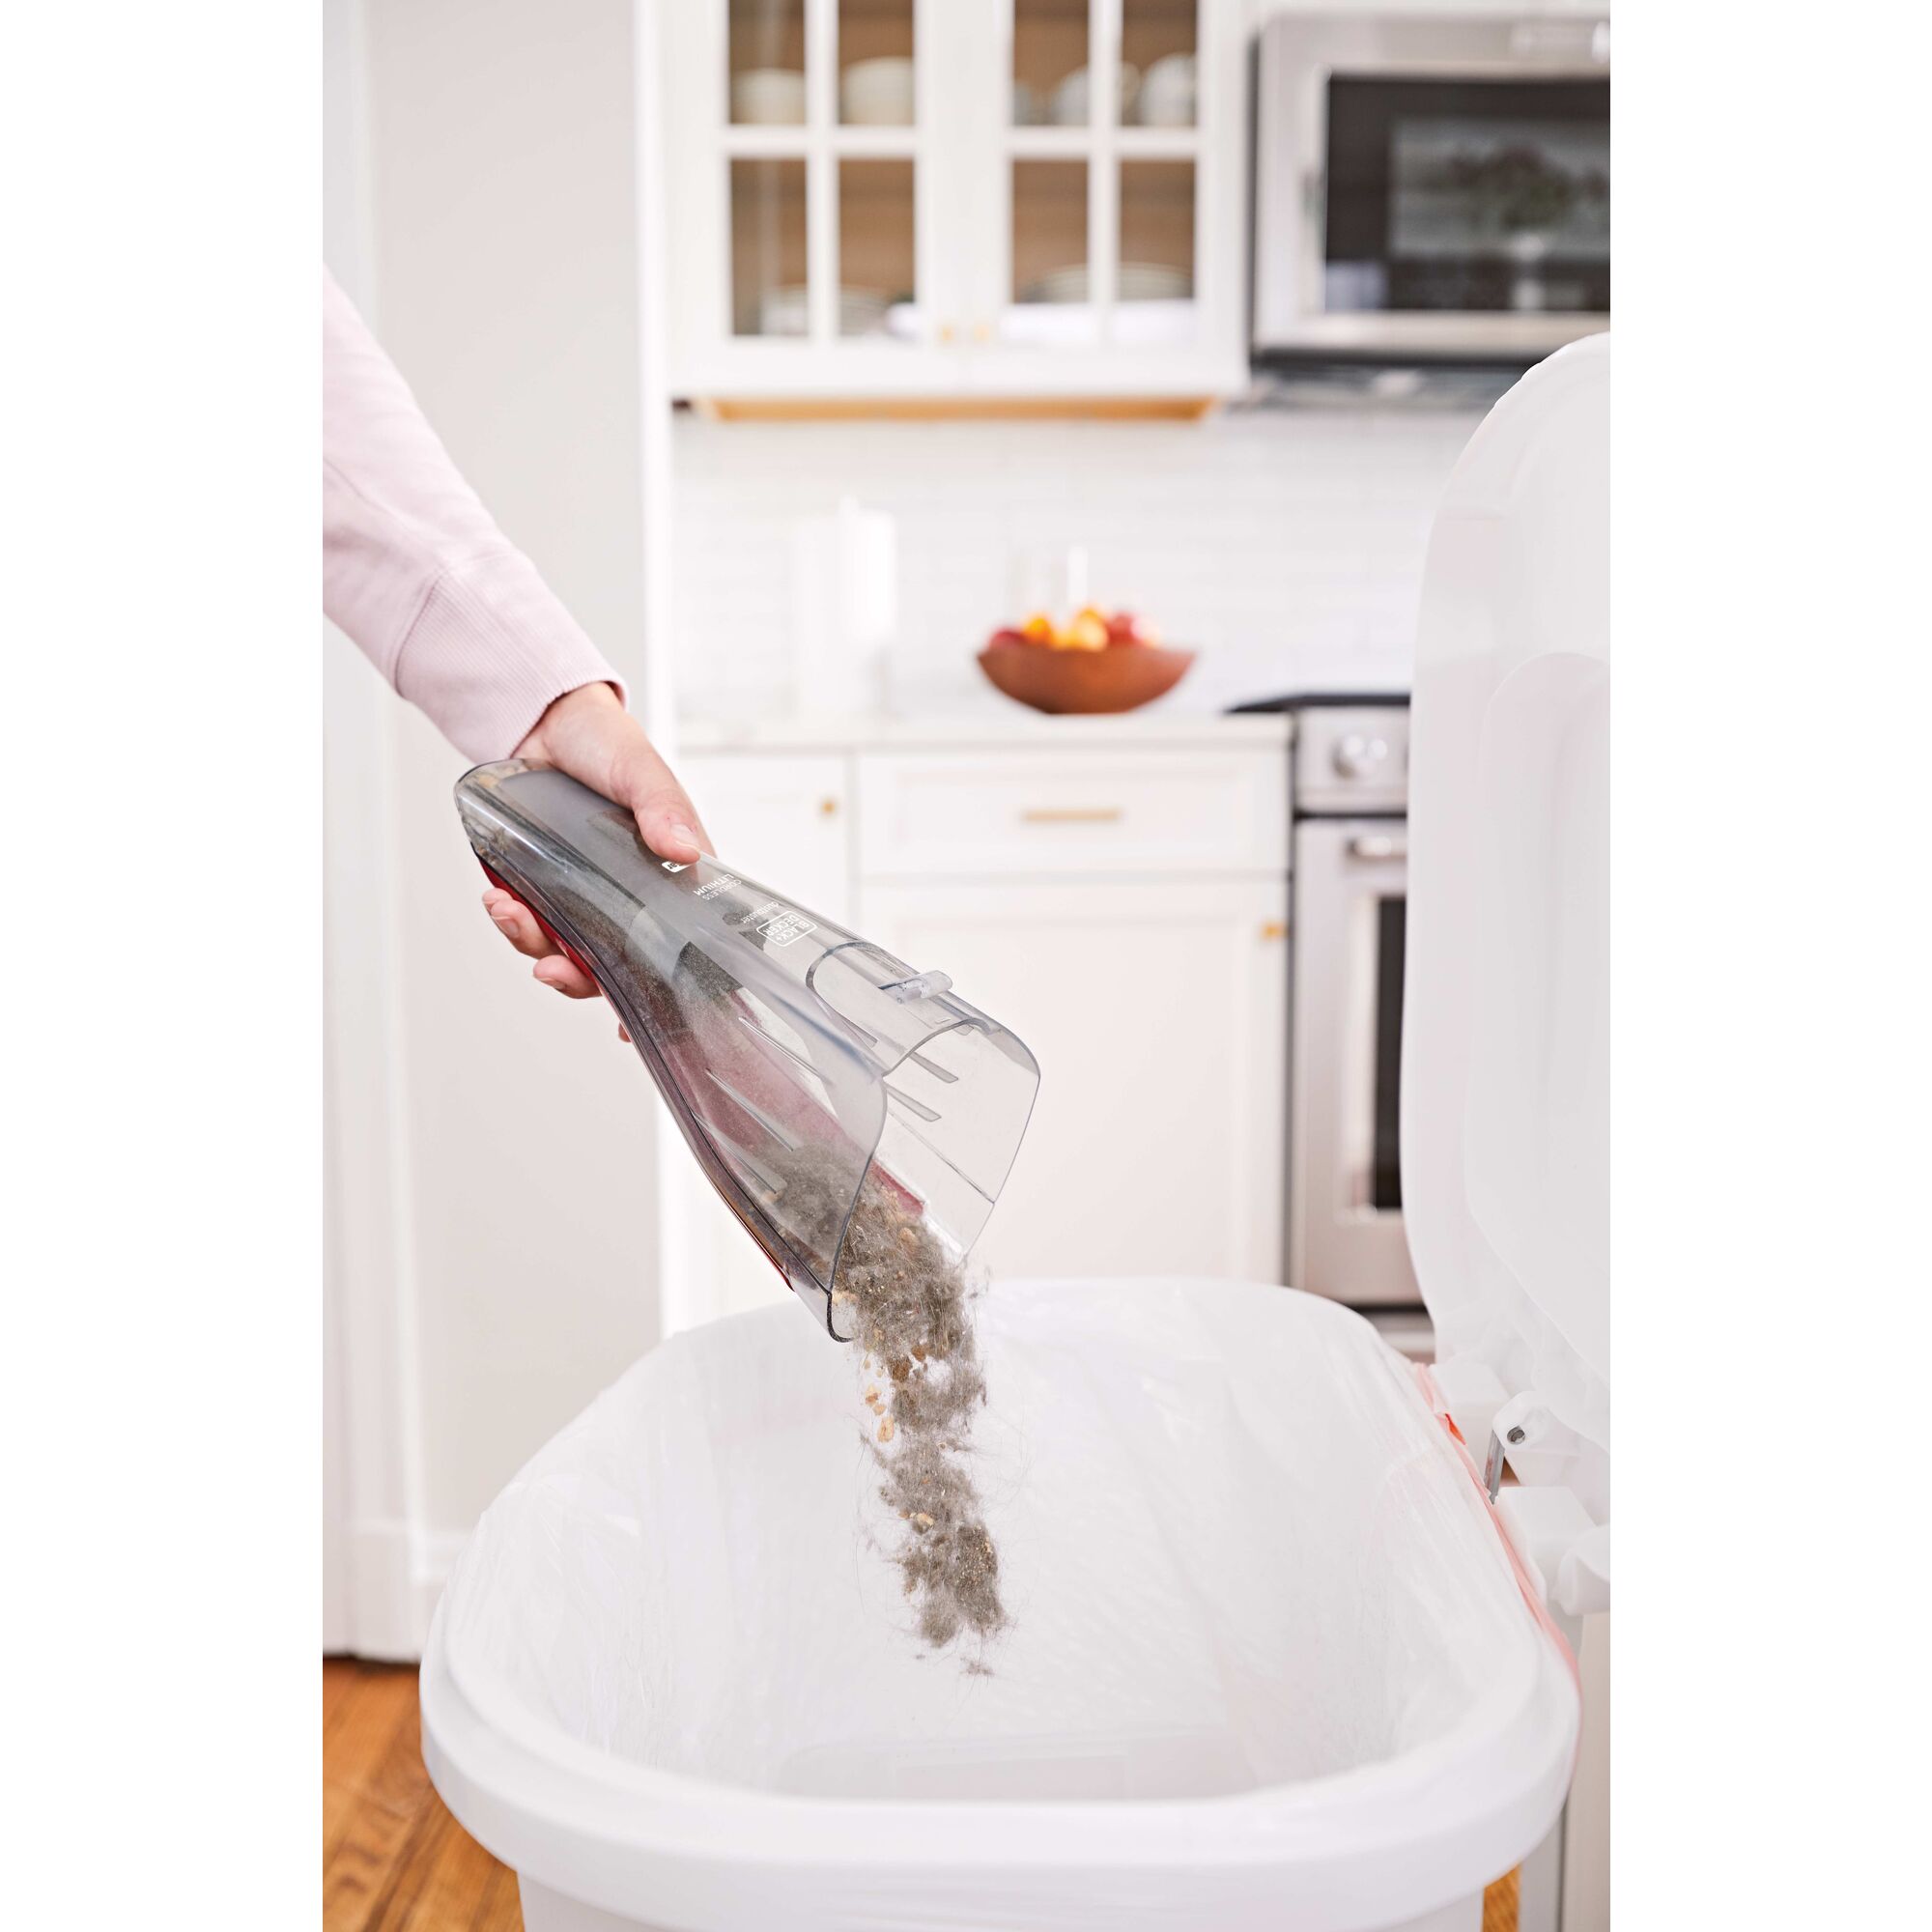 Clear bagless dirt bowl for easy cleaning feature of Dustbuster QuickClean Car Cordless Hand Vacuum With Motorized Upholstery Brush.